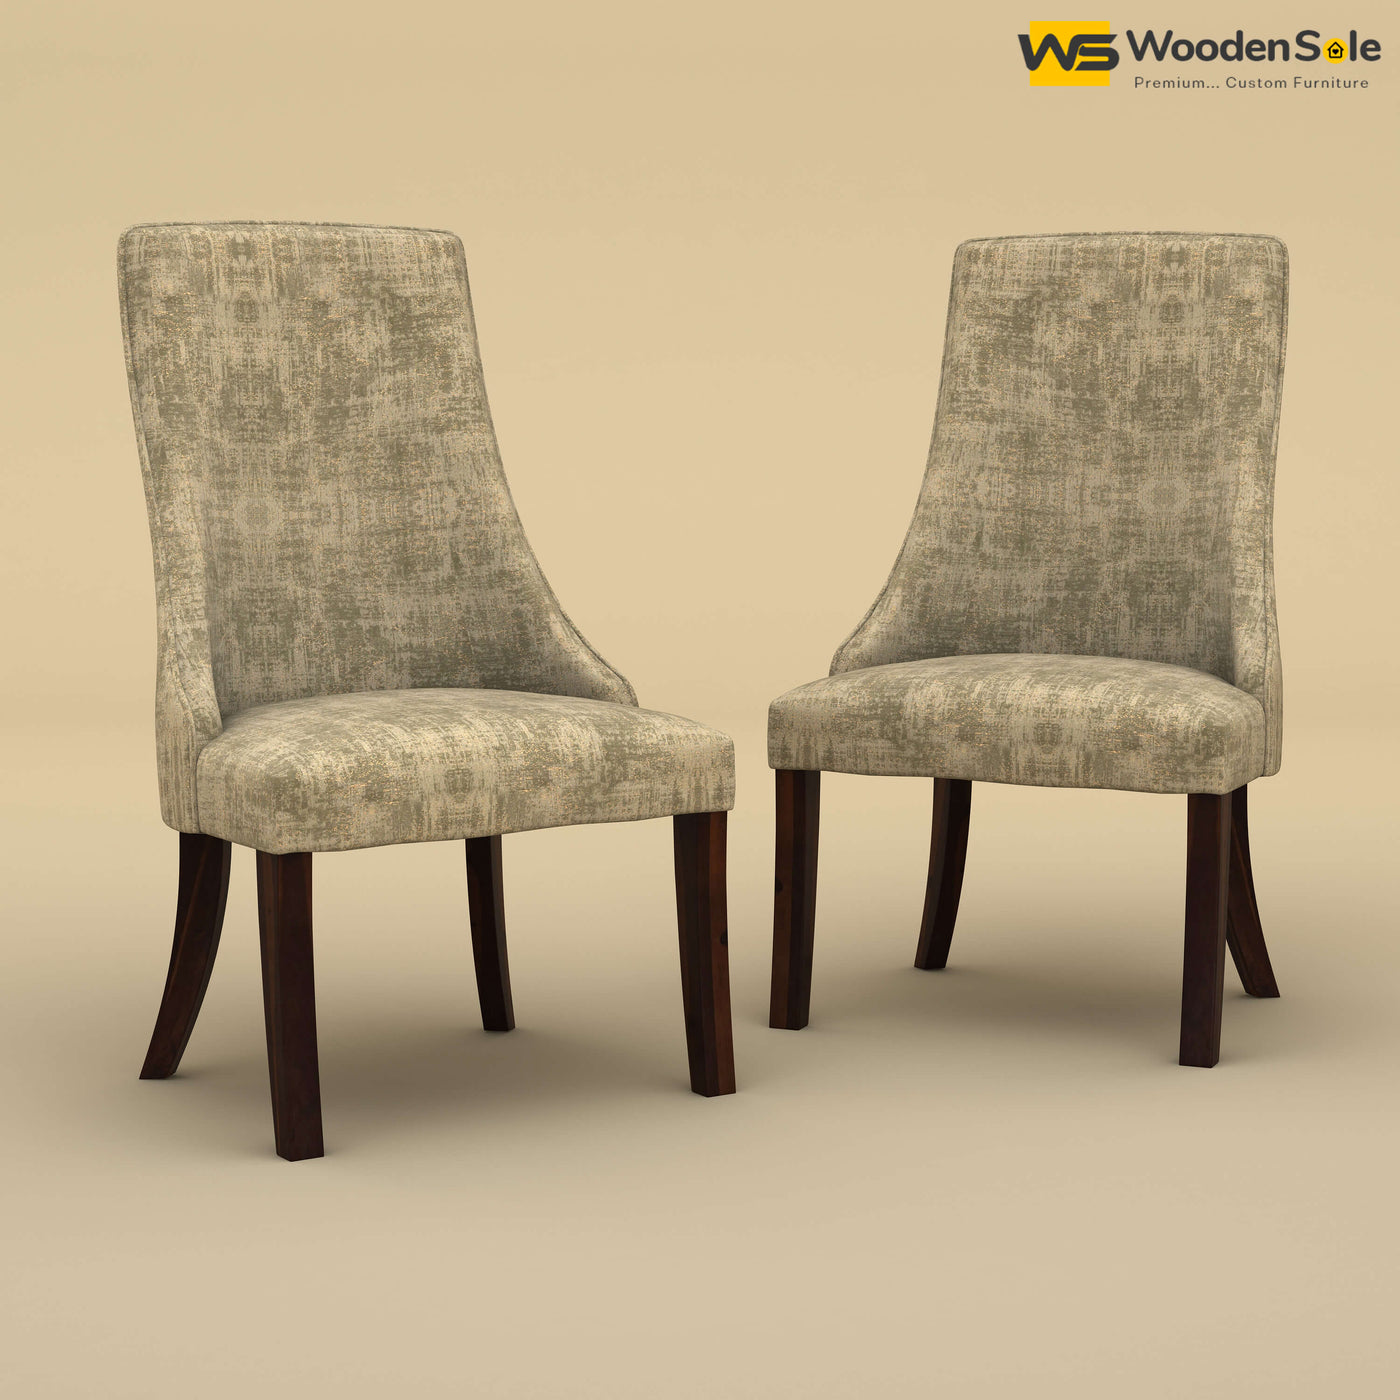 Dublin Dining Chairs - Set of 2 (Cotton, Patchy Cream)